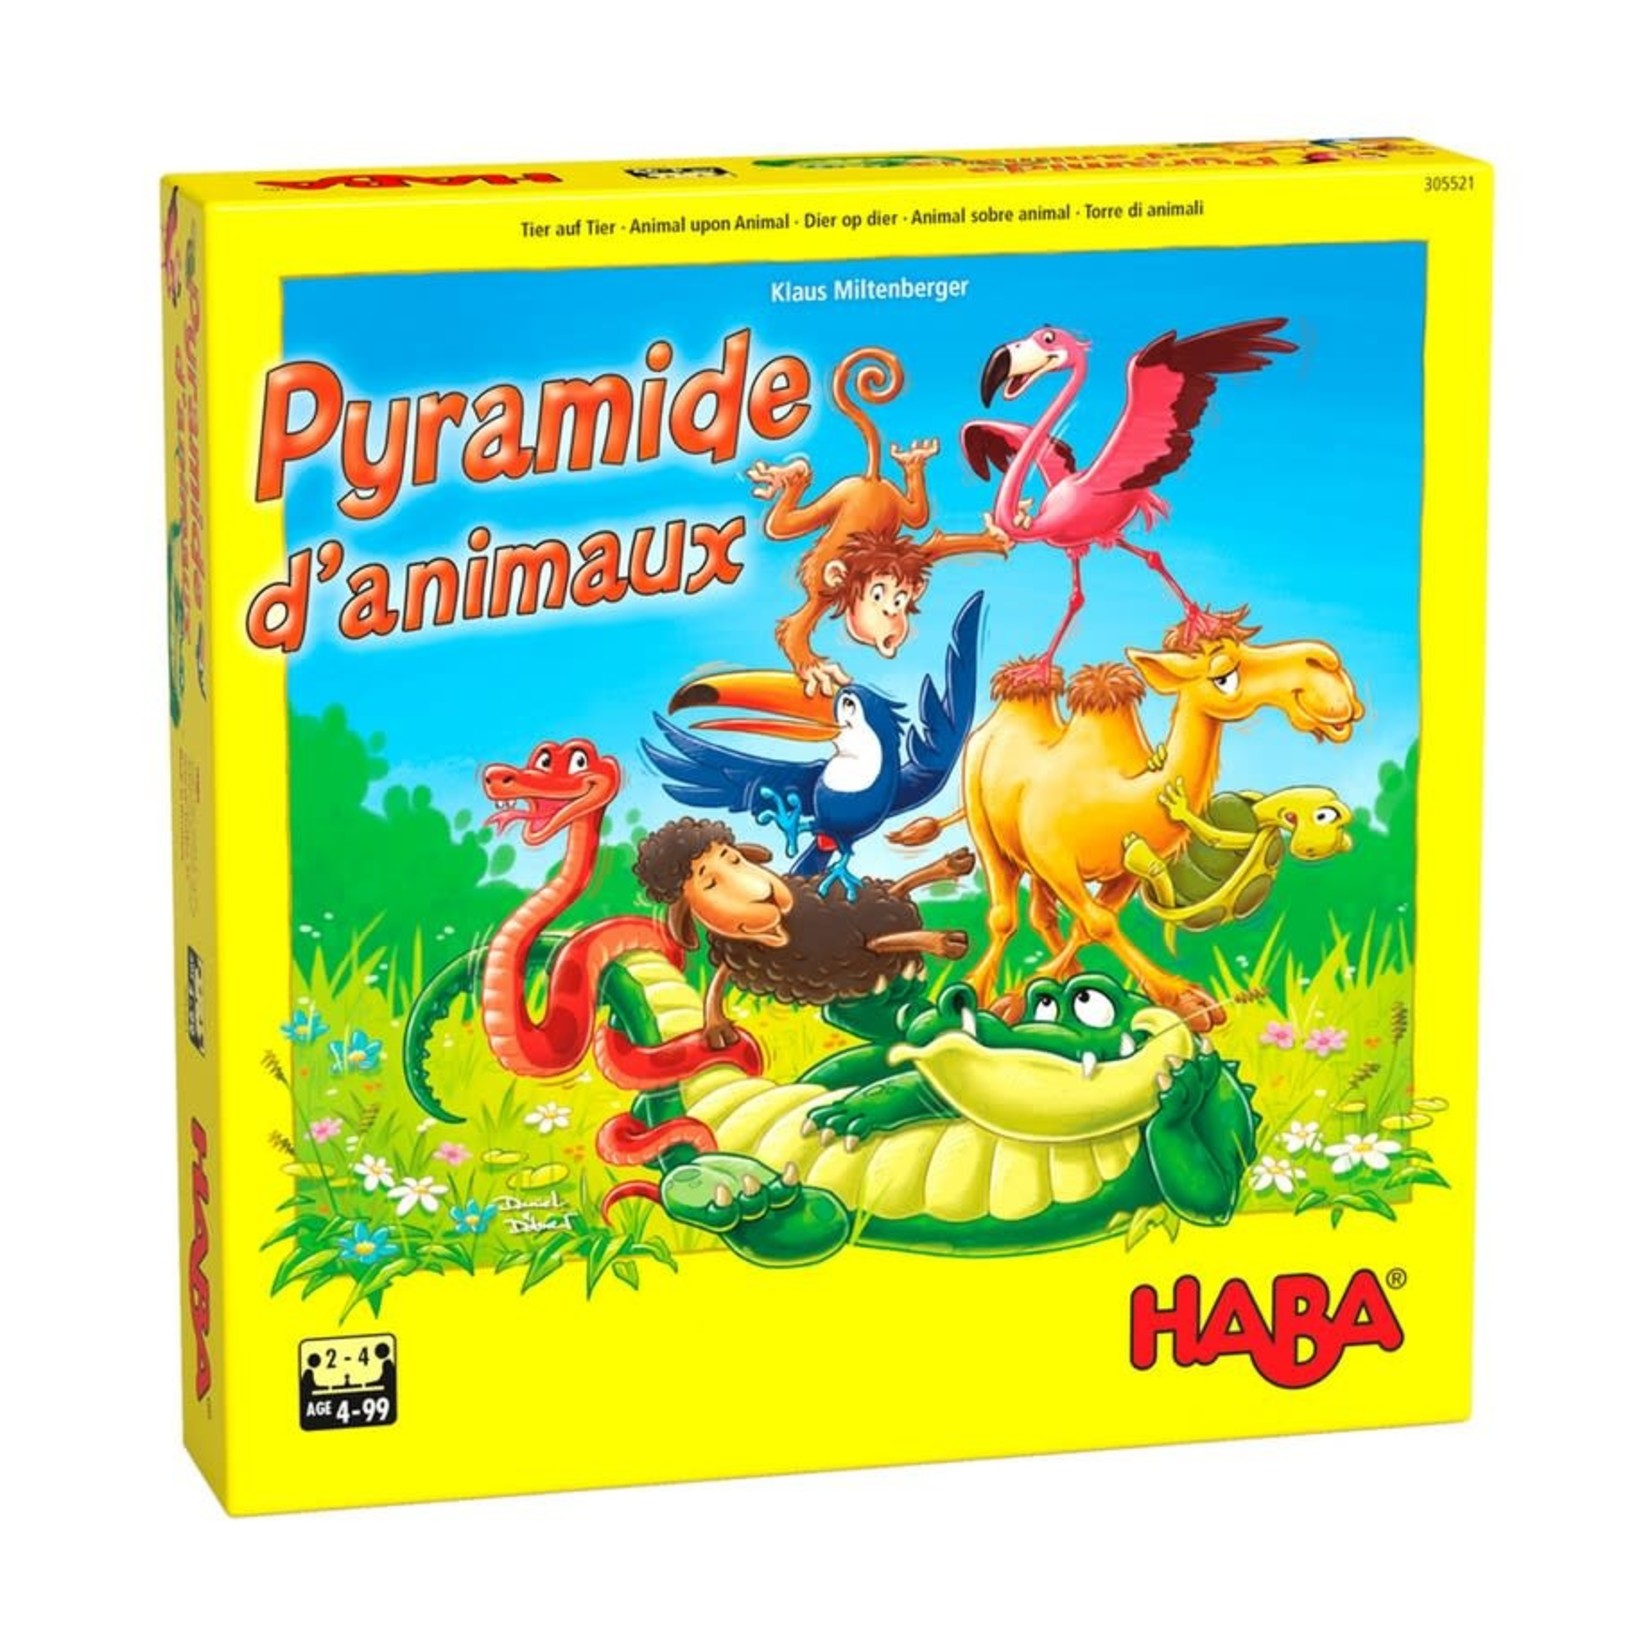 HABA Pyramide d'animaux